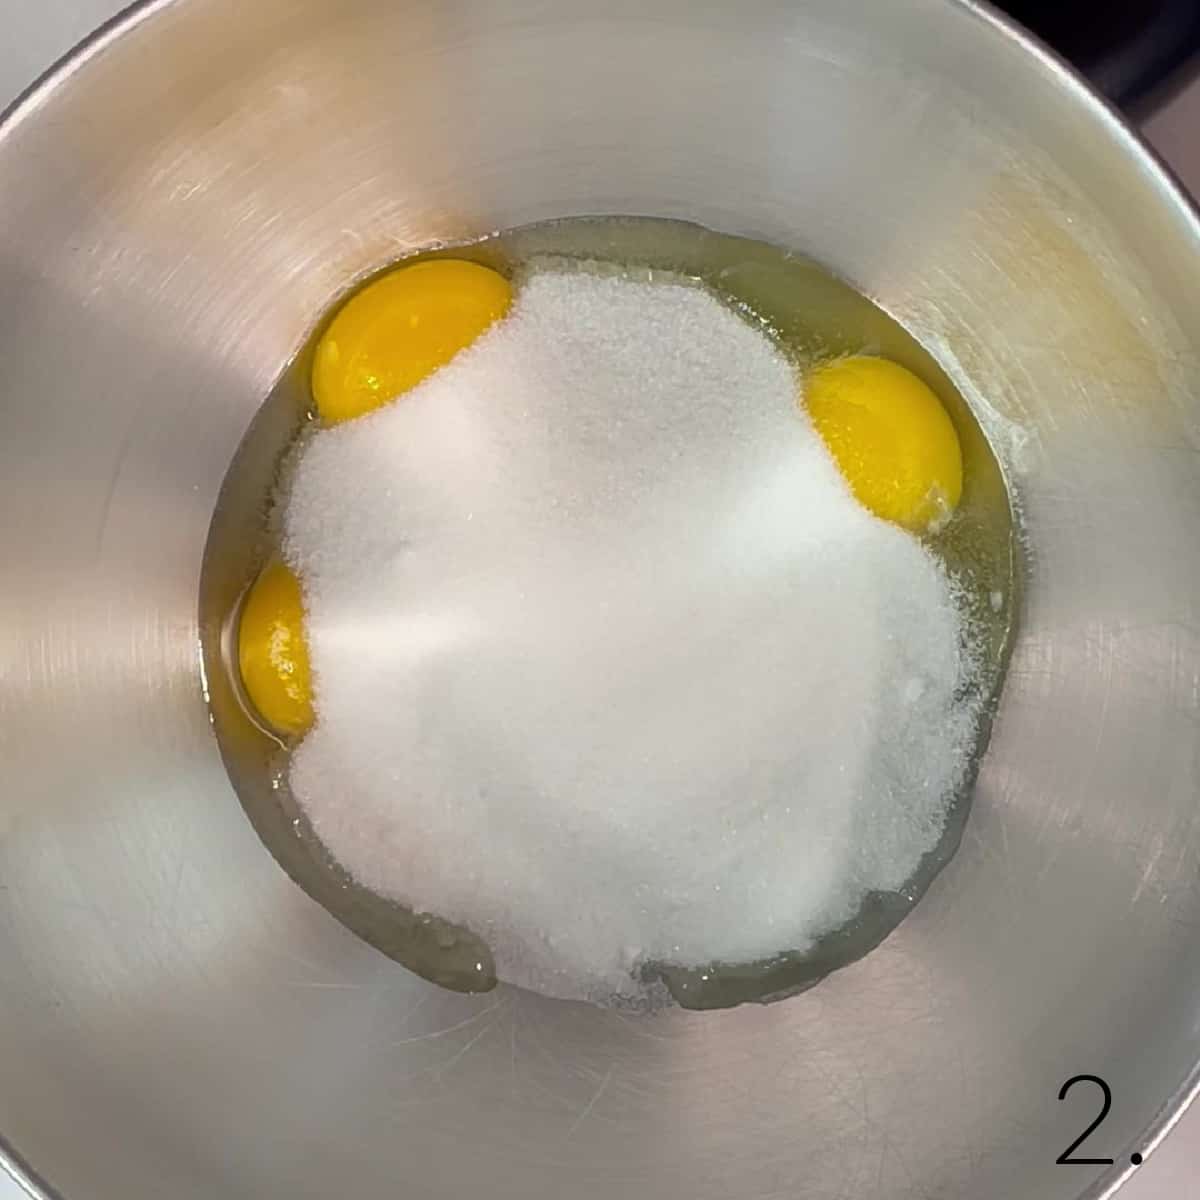 Eggs and sugar in a mixing bowl.